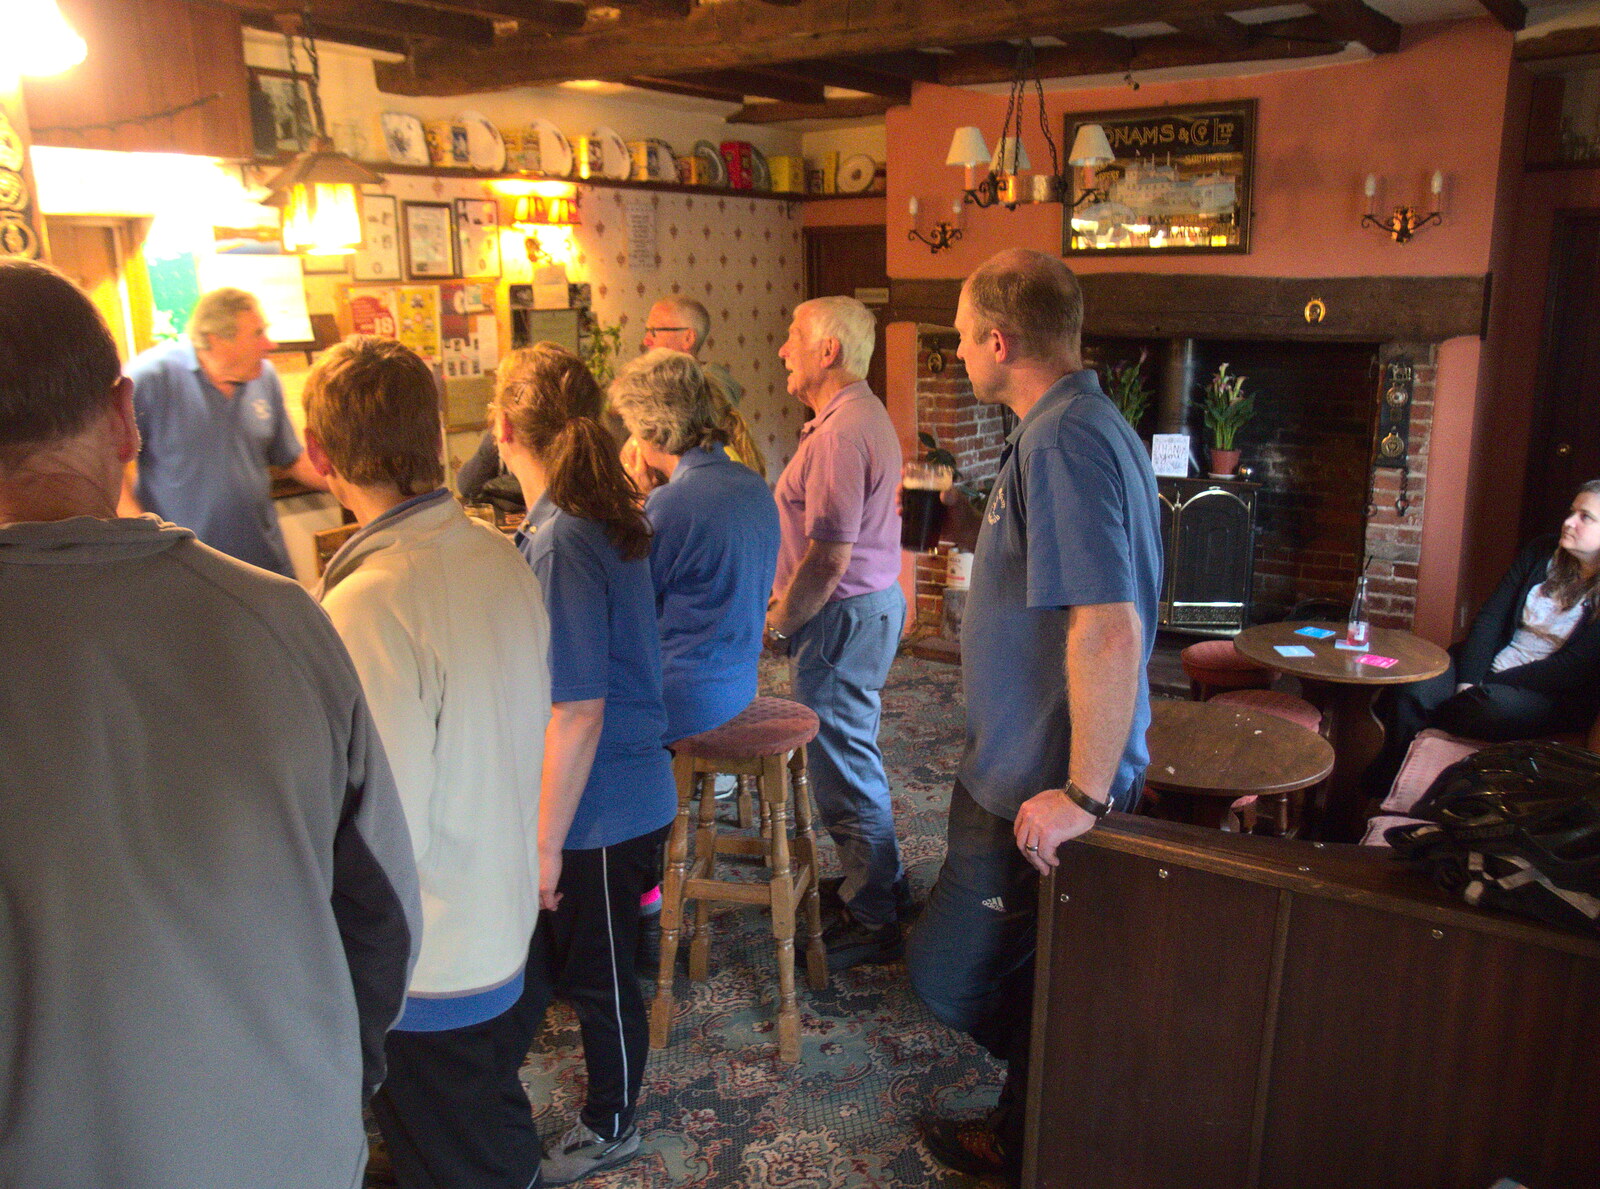 The BSCC hang around by the bar from The BSCC at the Mellis Railway and The Swan, Brome, Suffolk - 8th June 2017